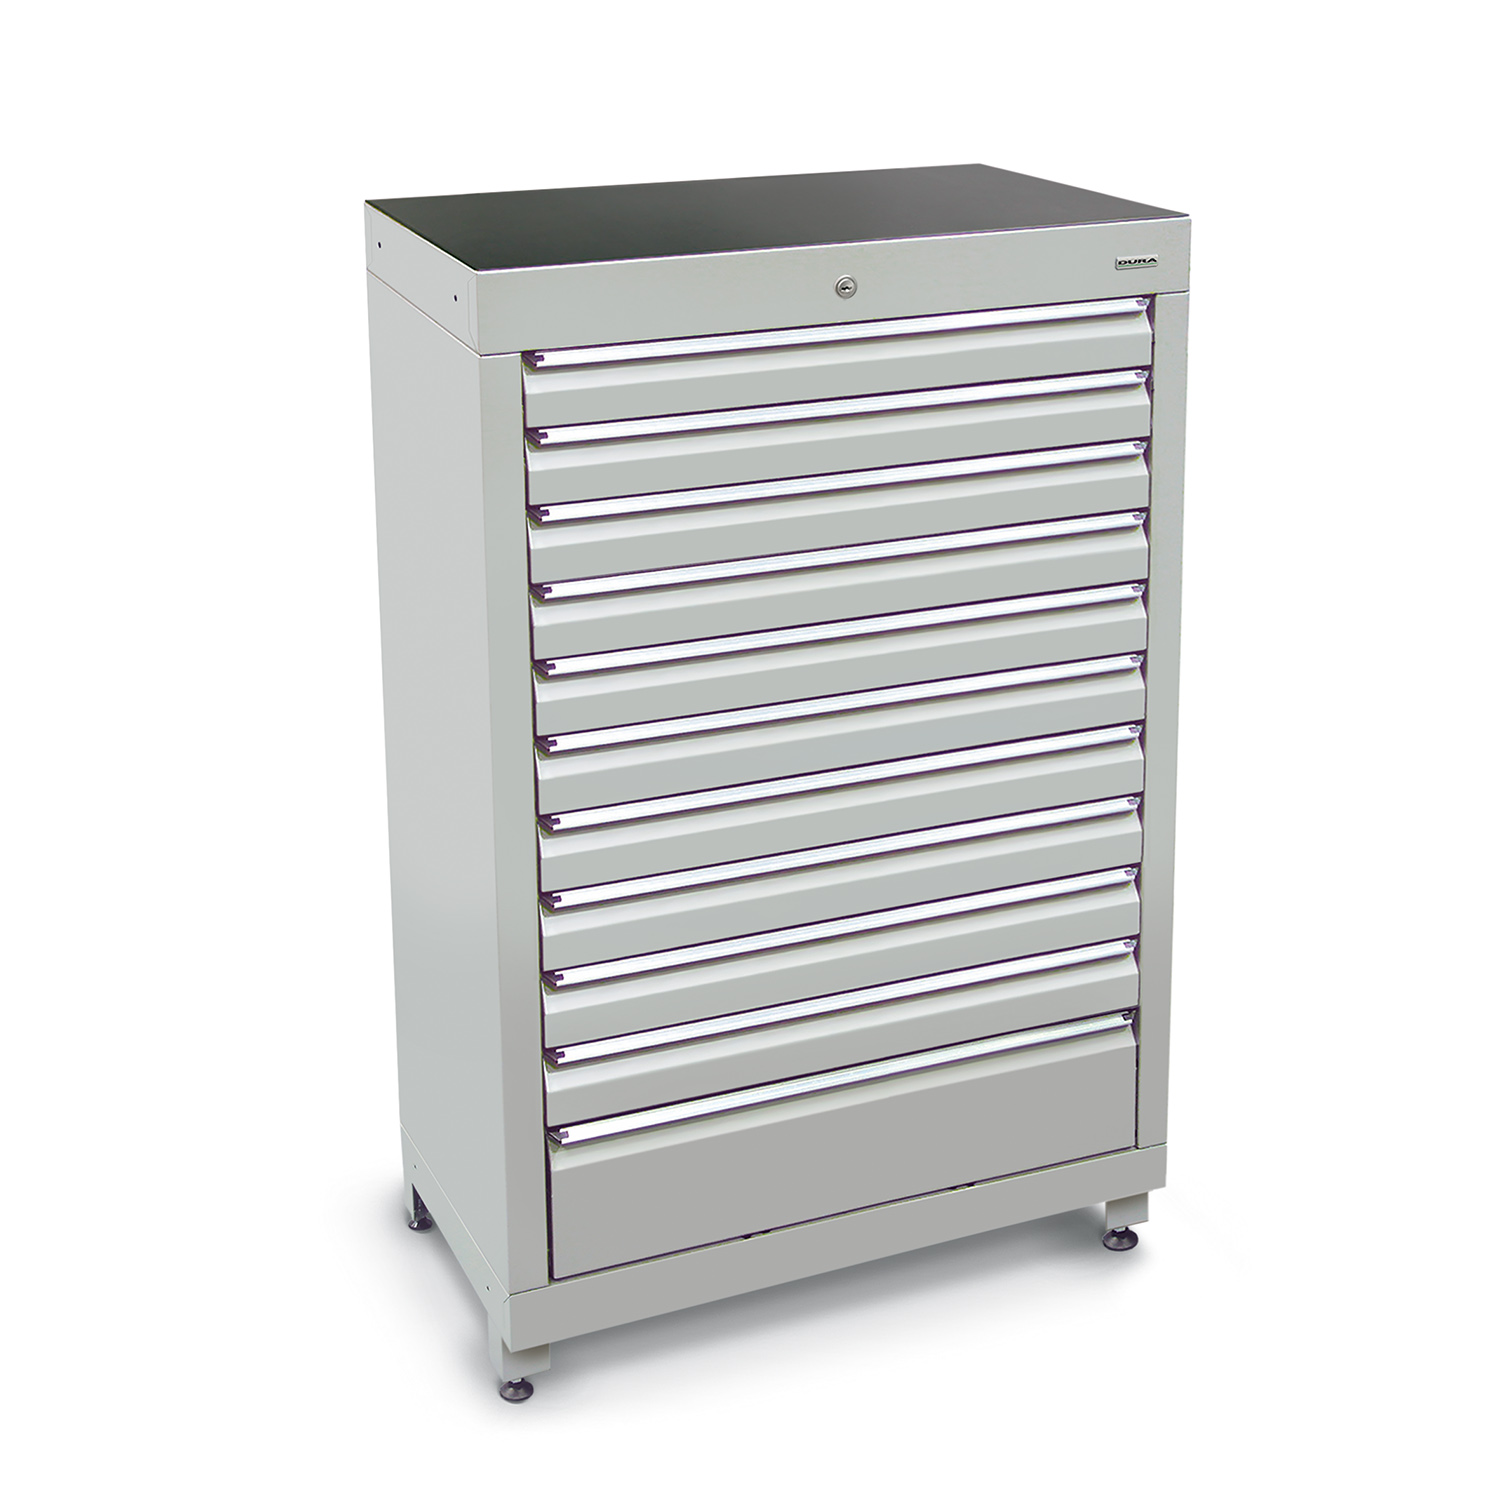 900mm Multi-drawer high tool cabinets with 11 drawers (10 medium, 1 large) and feet